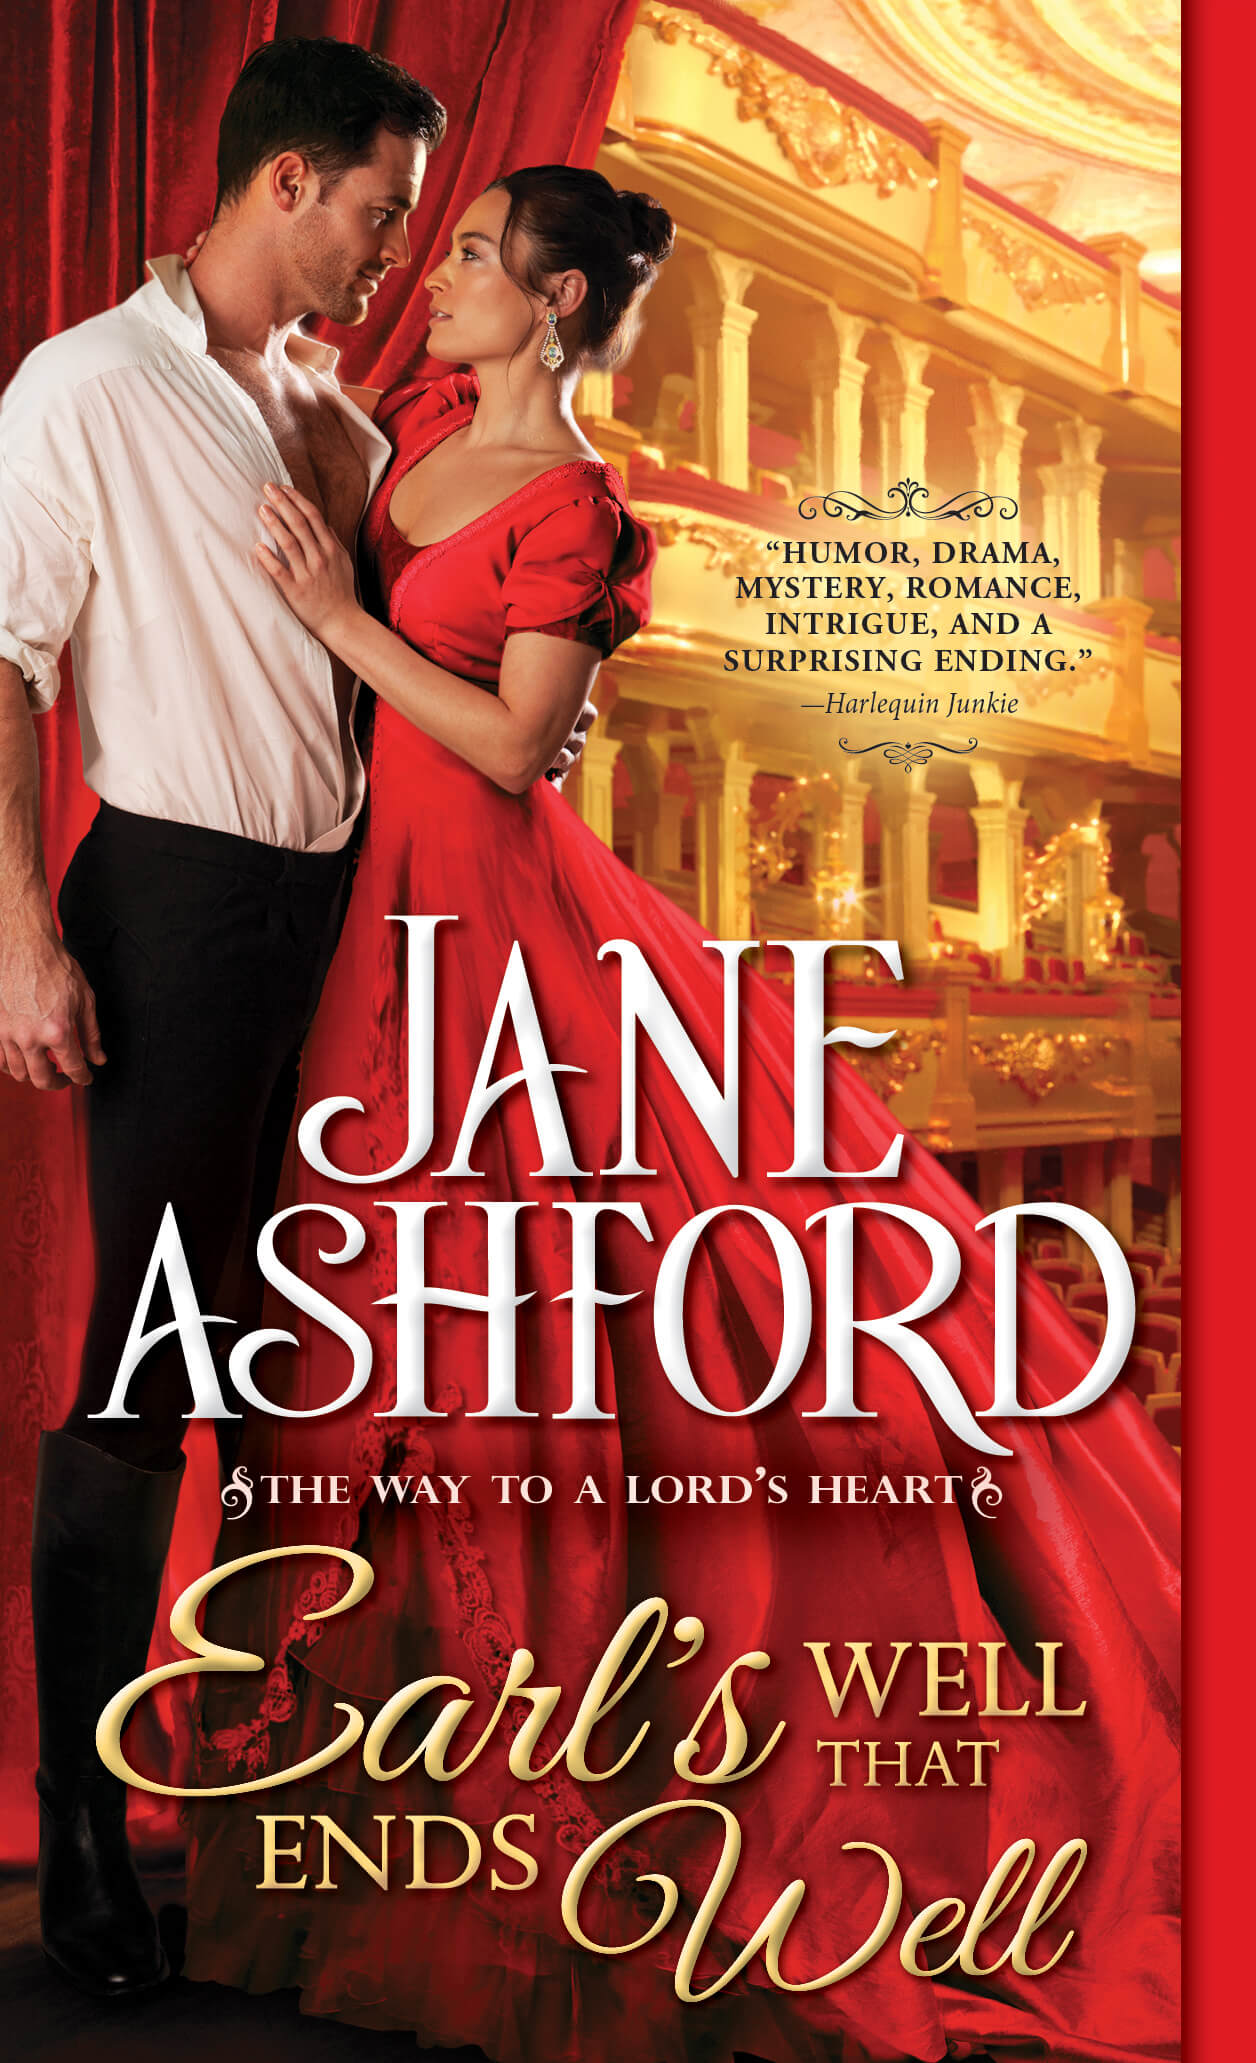 Earl's Well That Ends Well by Jane Ashford